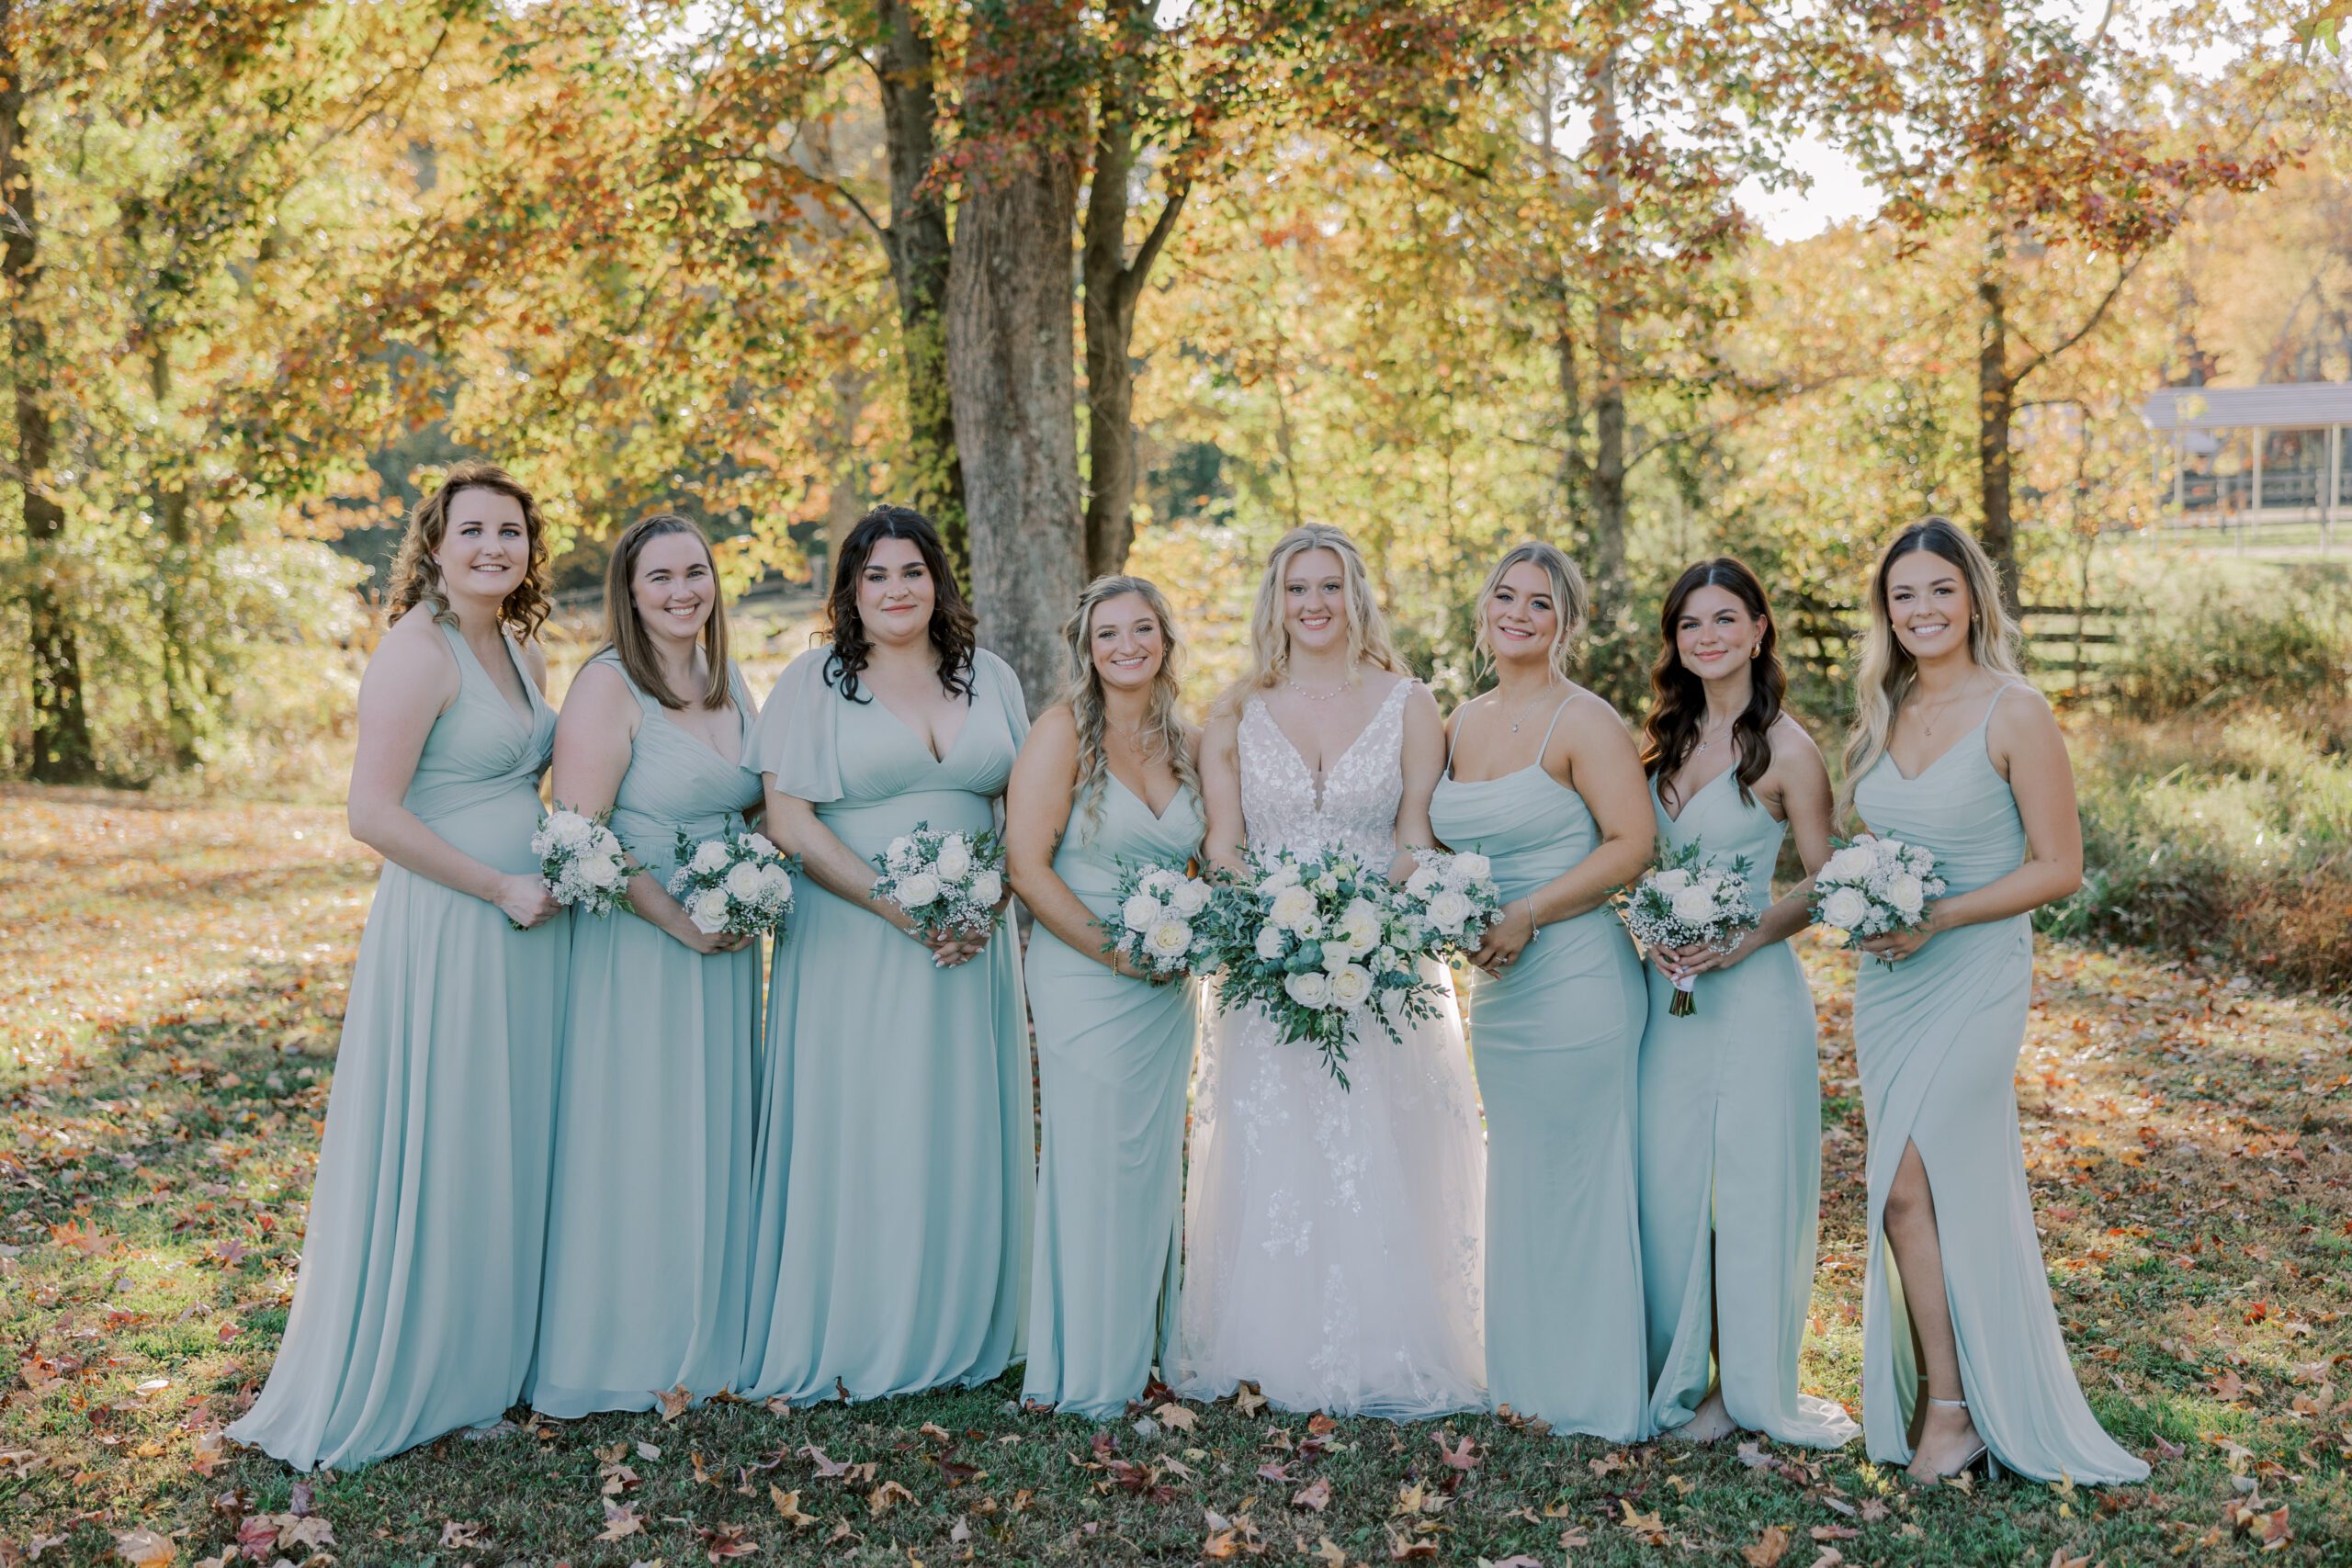 Bride and her 7 bridesmaids all holding bouquets of white flowers, wearing light green dresses, smiling, fall colored trees in background at arbor haven